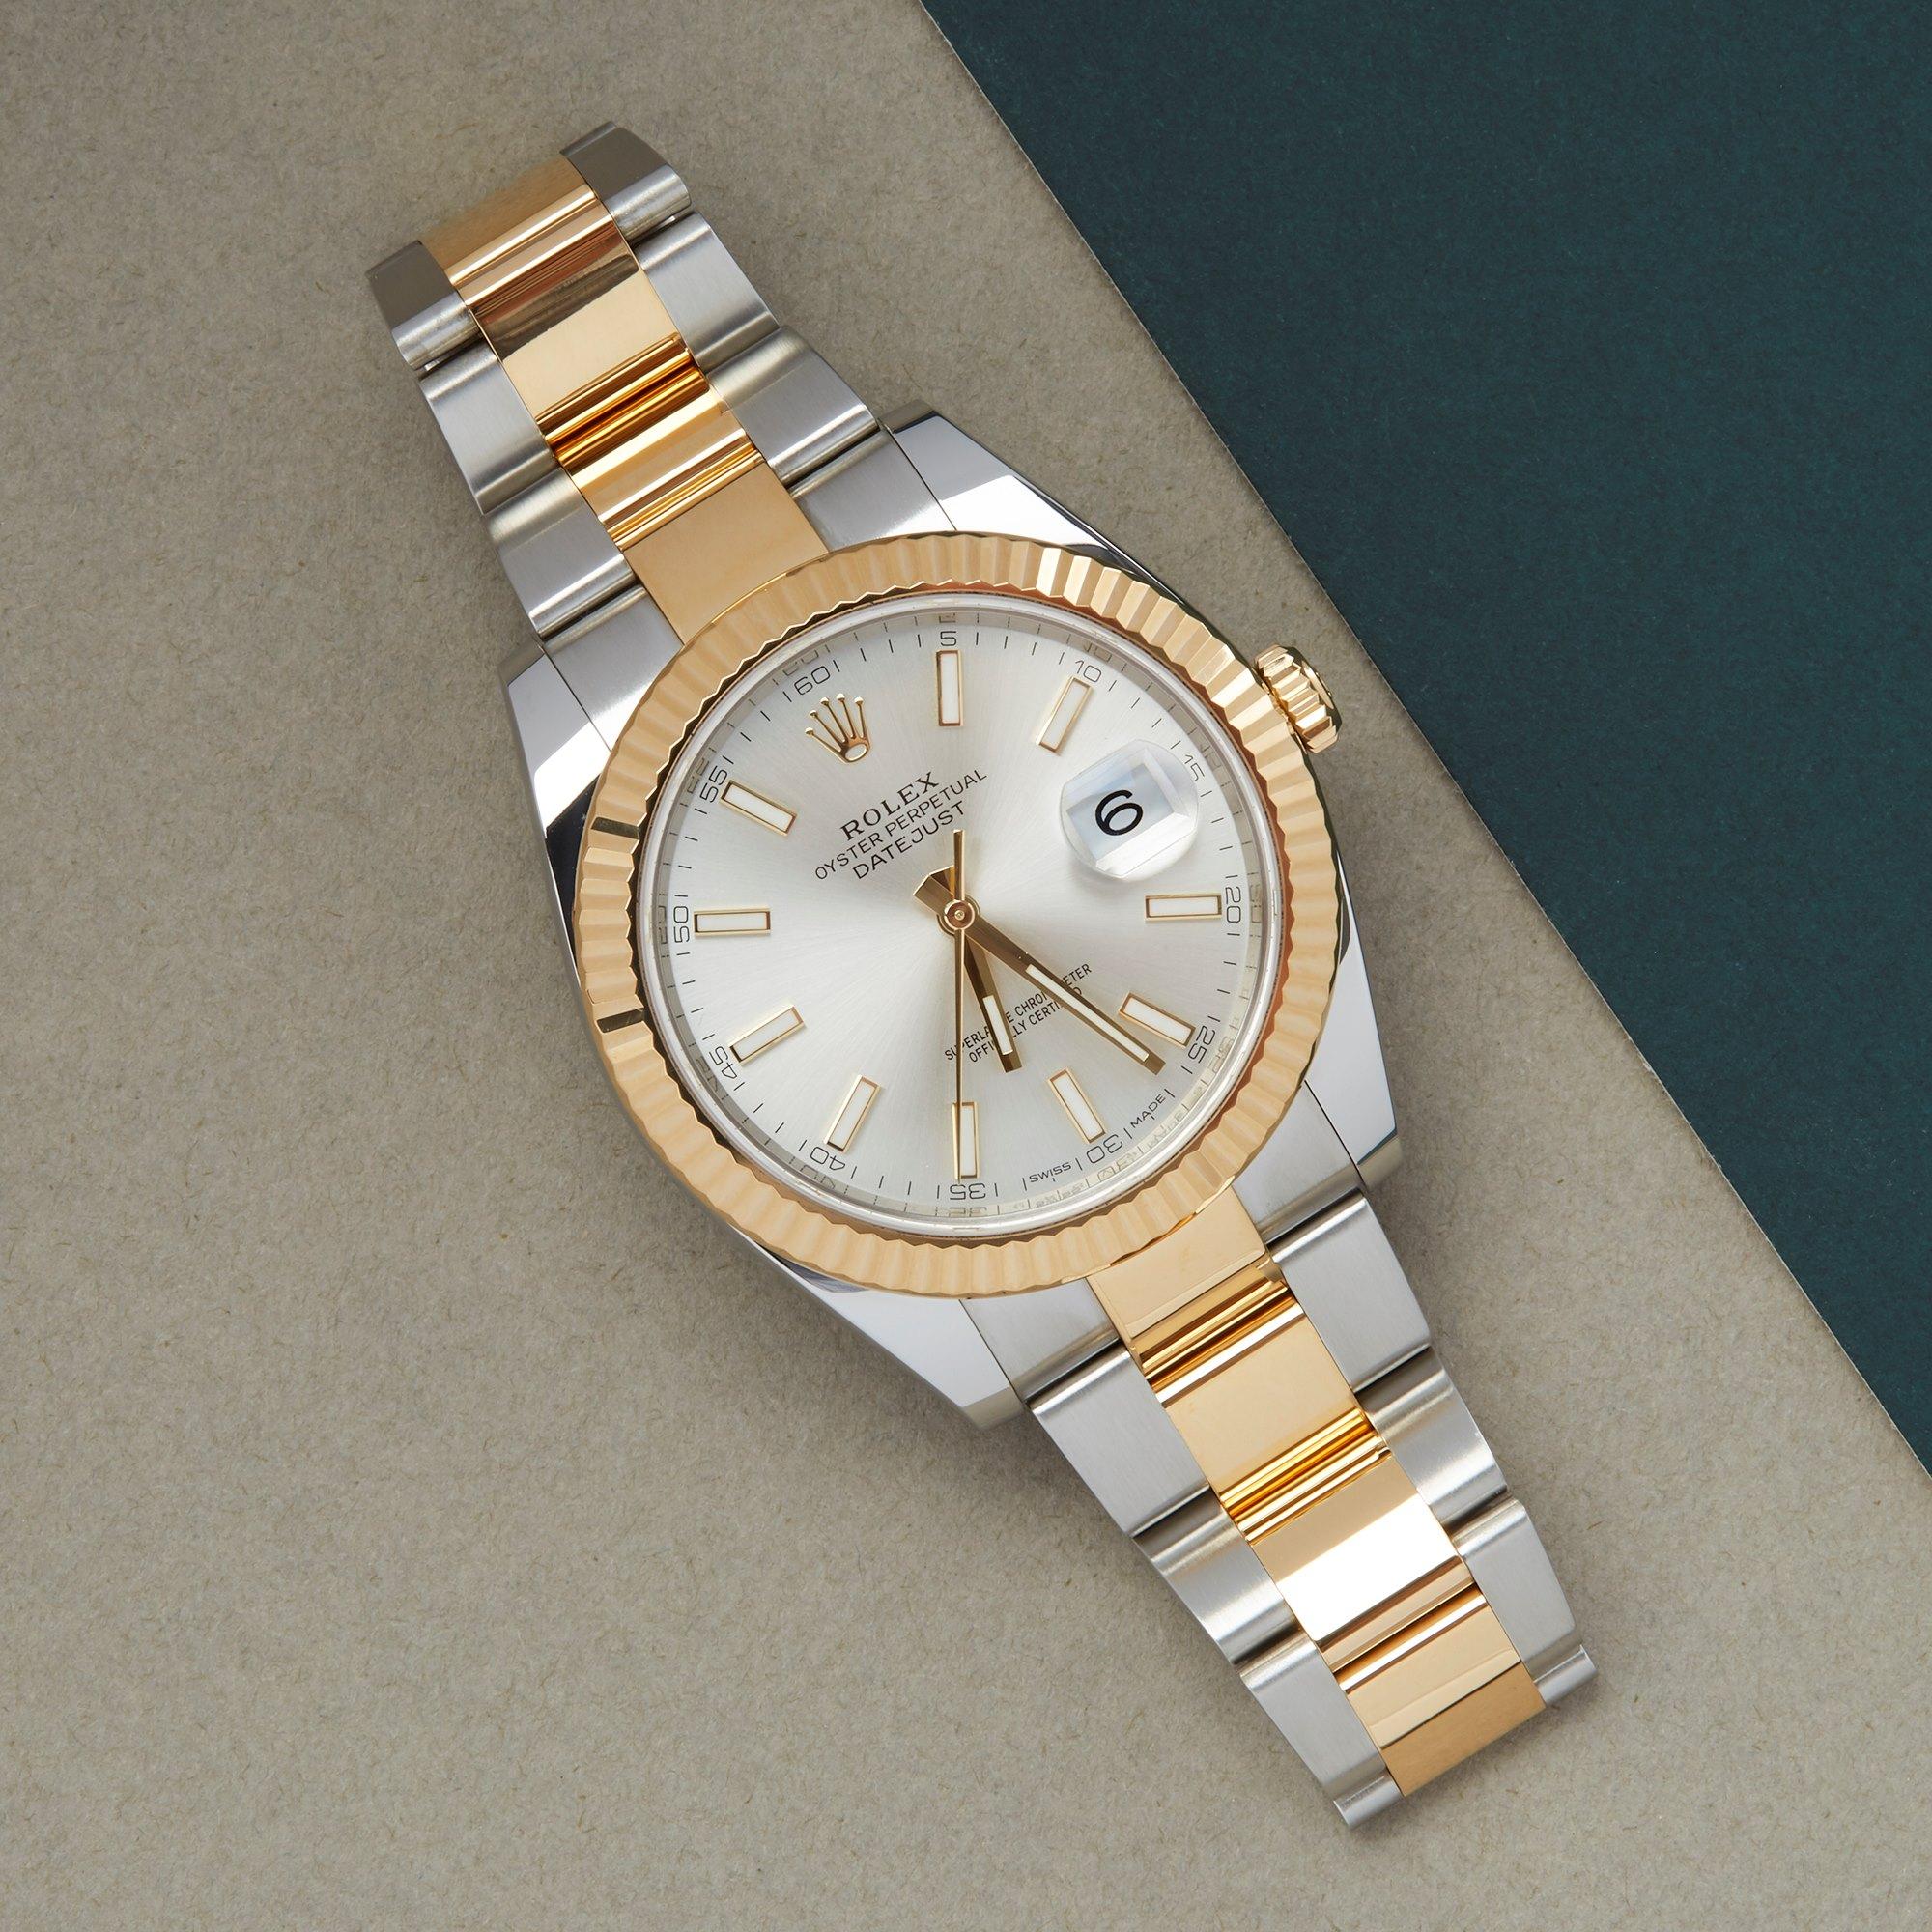 Xupes Reference: W007812
Manufacturer: Rolex
Model: Datejust
Model Variant: 41
Model Number: 126333
Age: 43928
Gender: Men
Complete With: Rolex Box, Manuals, Card Holder, Swing Tag & Guarantee
Dial: Silver Baton
Glass: Sapphire Crystal
Case Size: